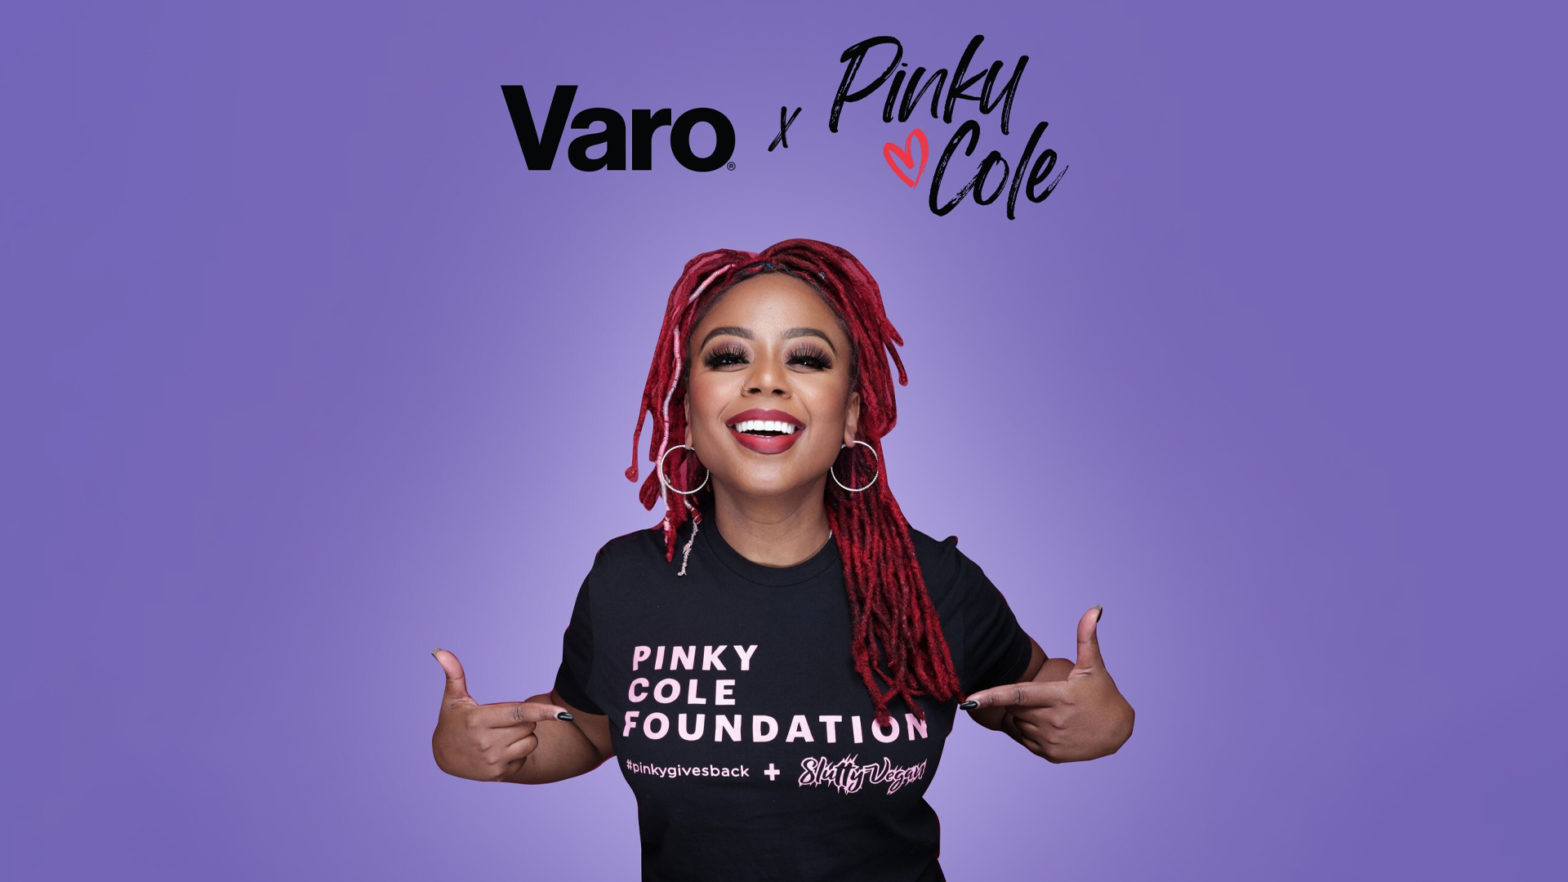 Slutty Vegan's Pinky Cole, Varo Bank Link Up To Provide Entrepreneurs With Financial Resources